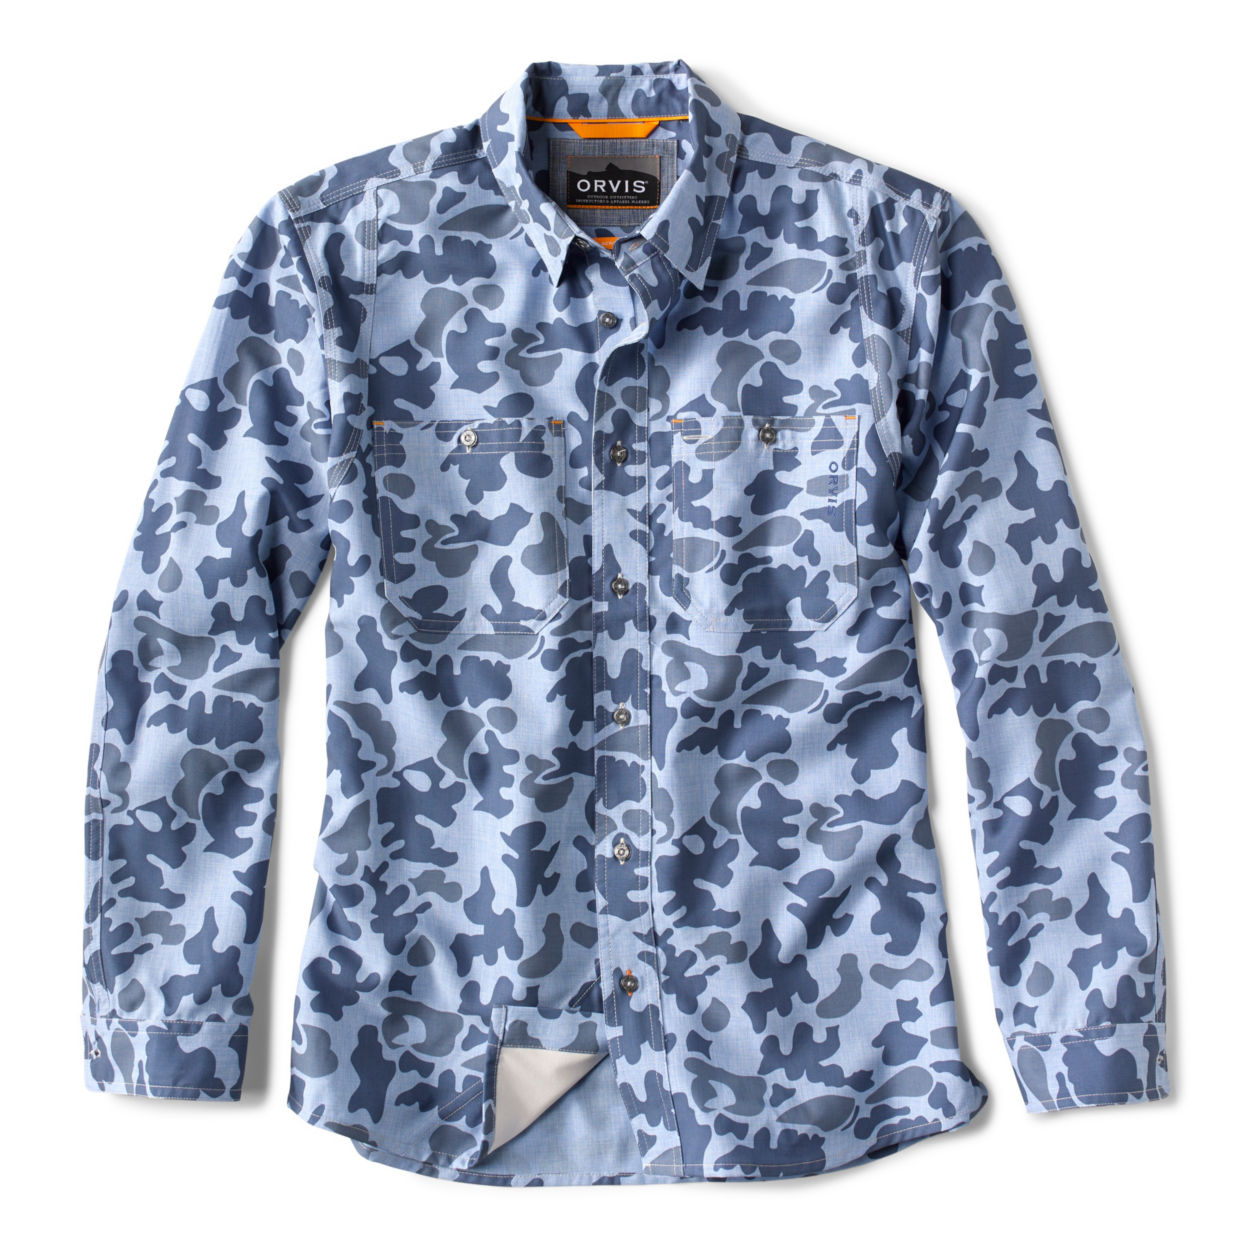 Men's Tech Chambray Performance Work Shirt Medium Blue Camo Size Large Polyester/Recycled Materials Orvis